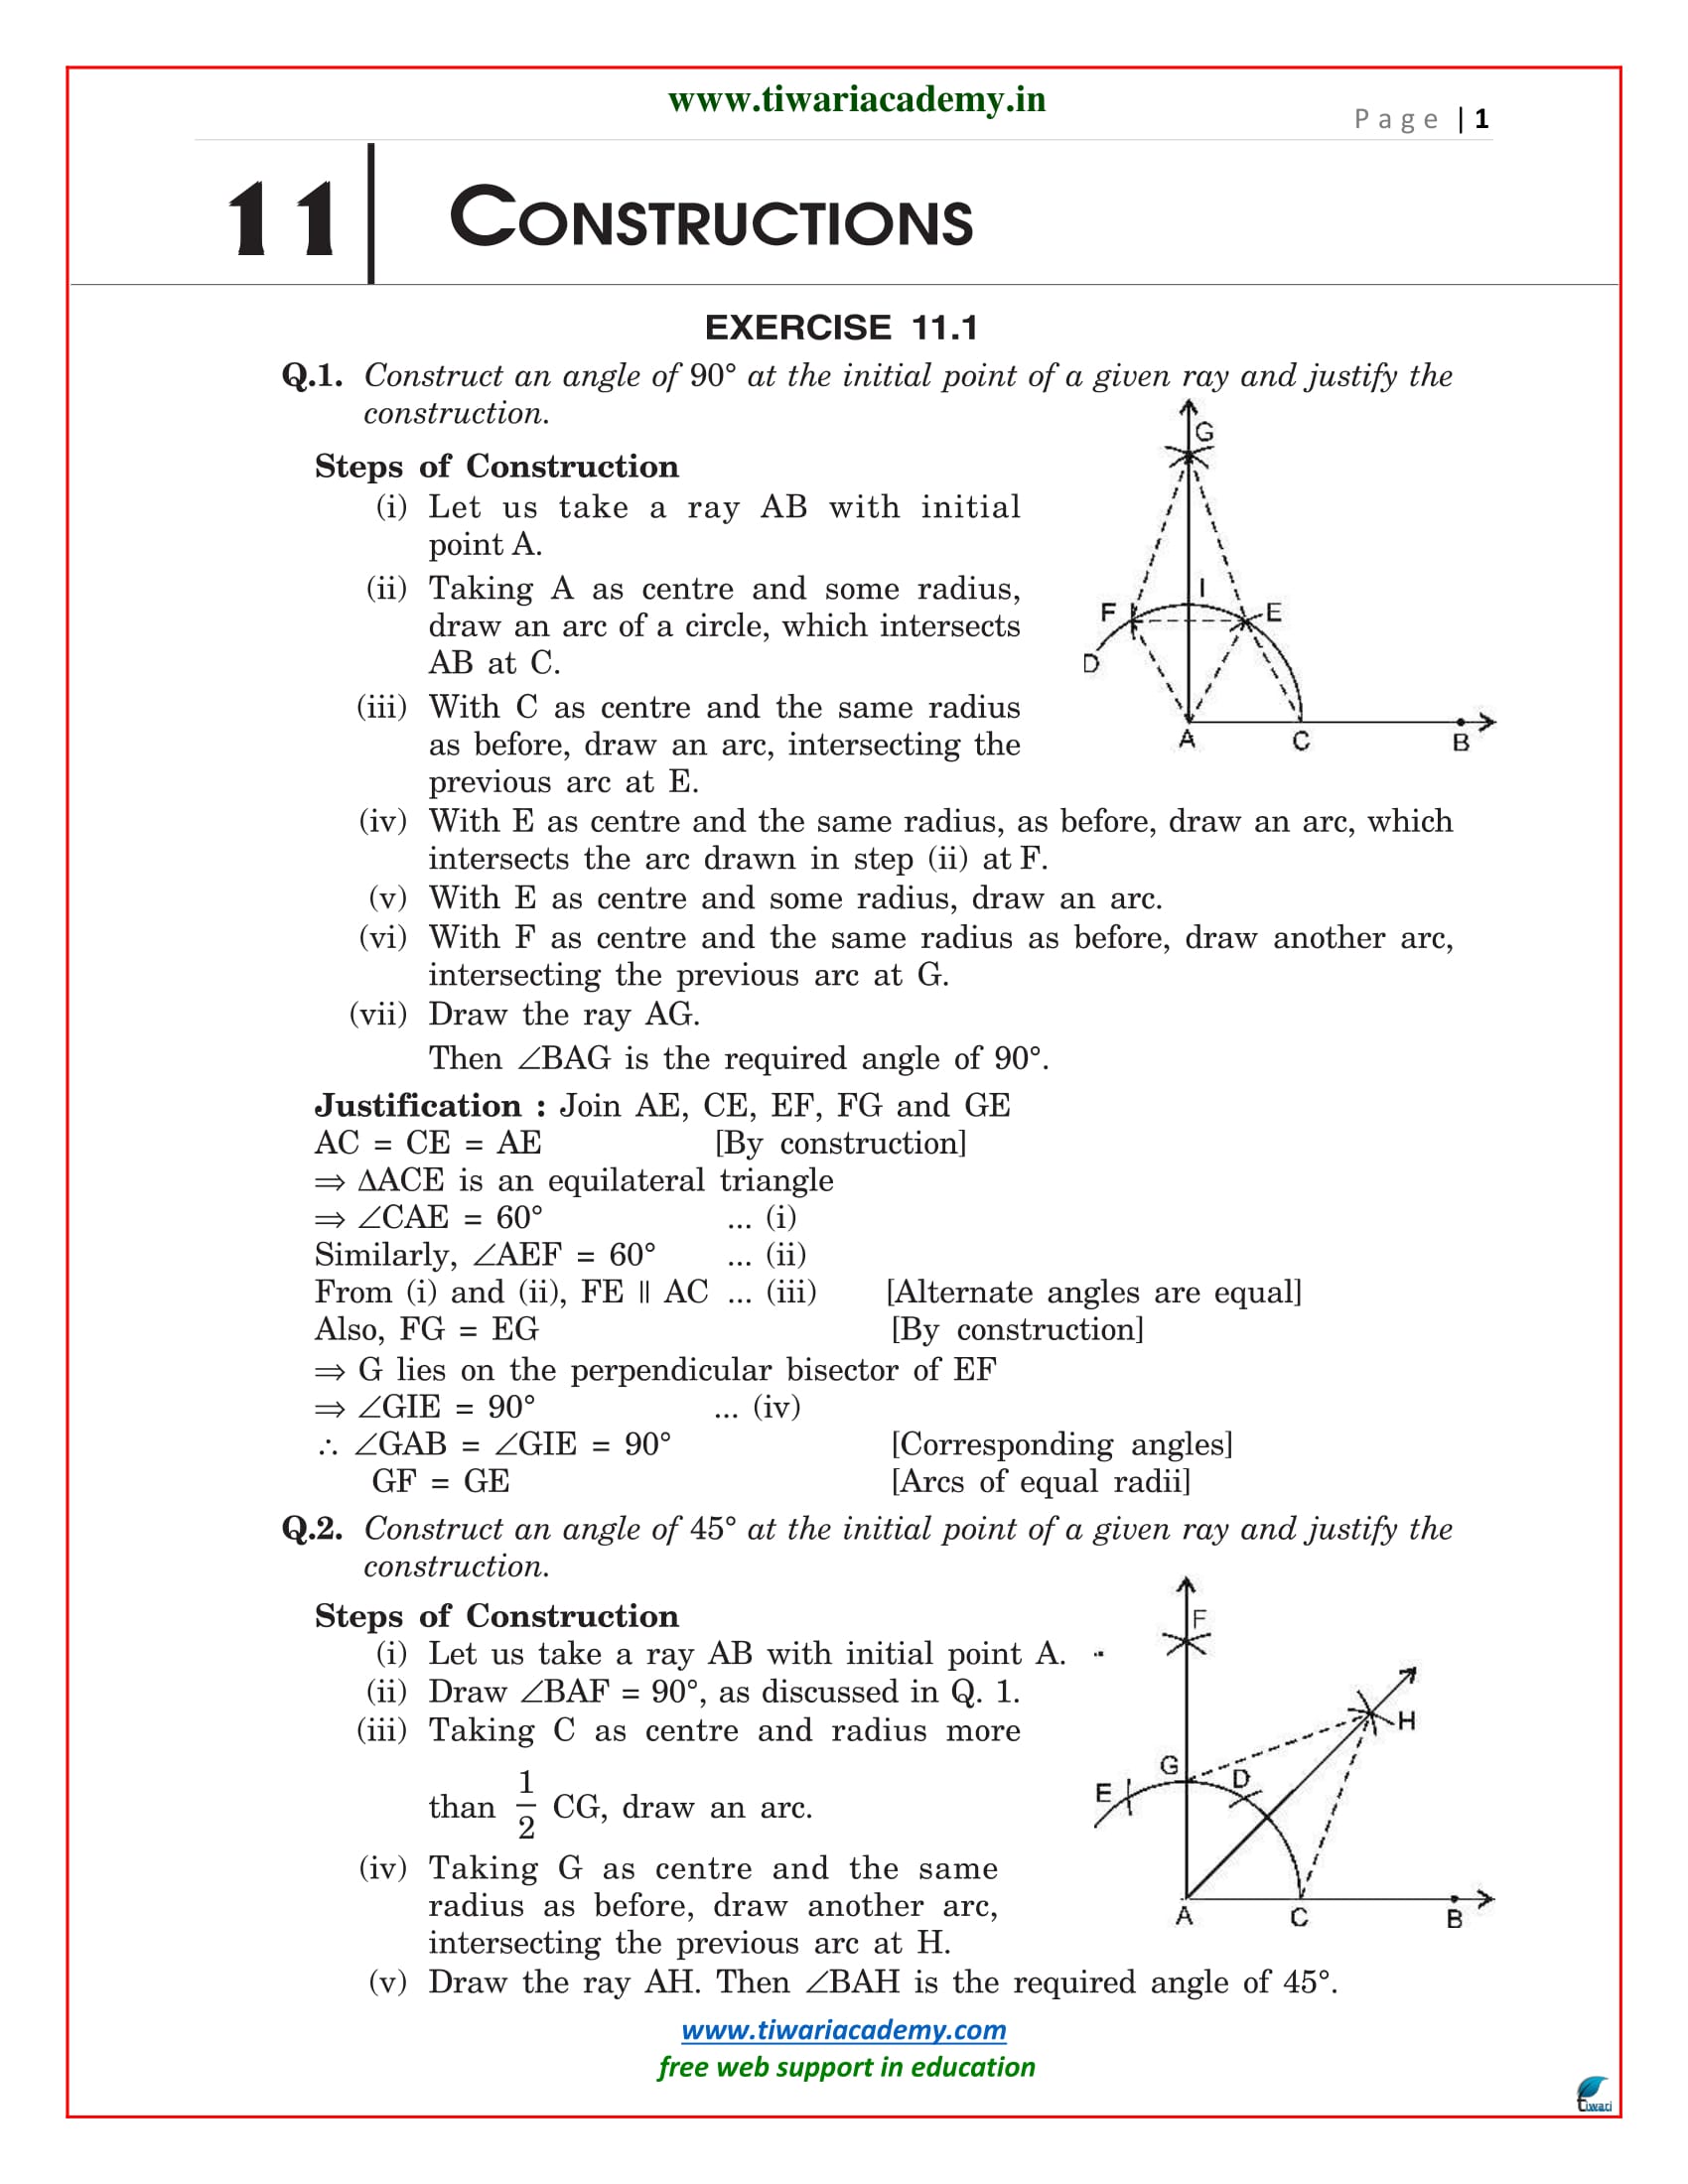 NCERT Solutions for Class 9 Maths Chapter 11 Exercise 11.1